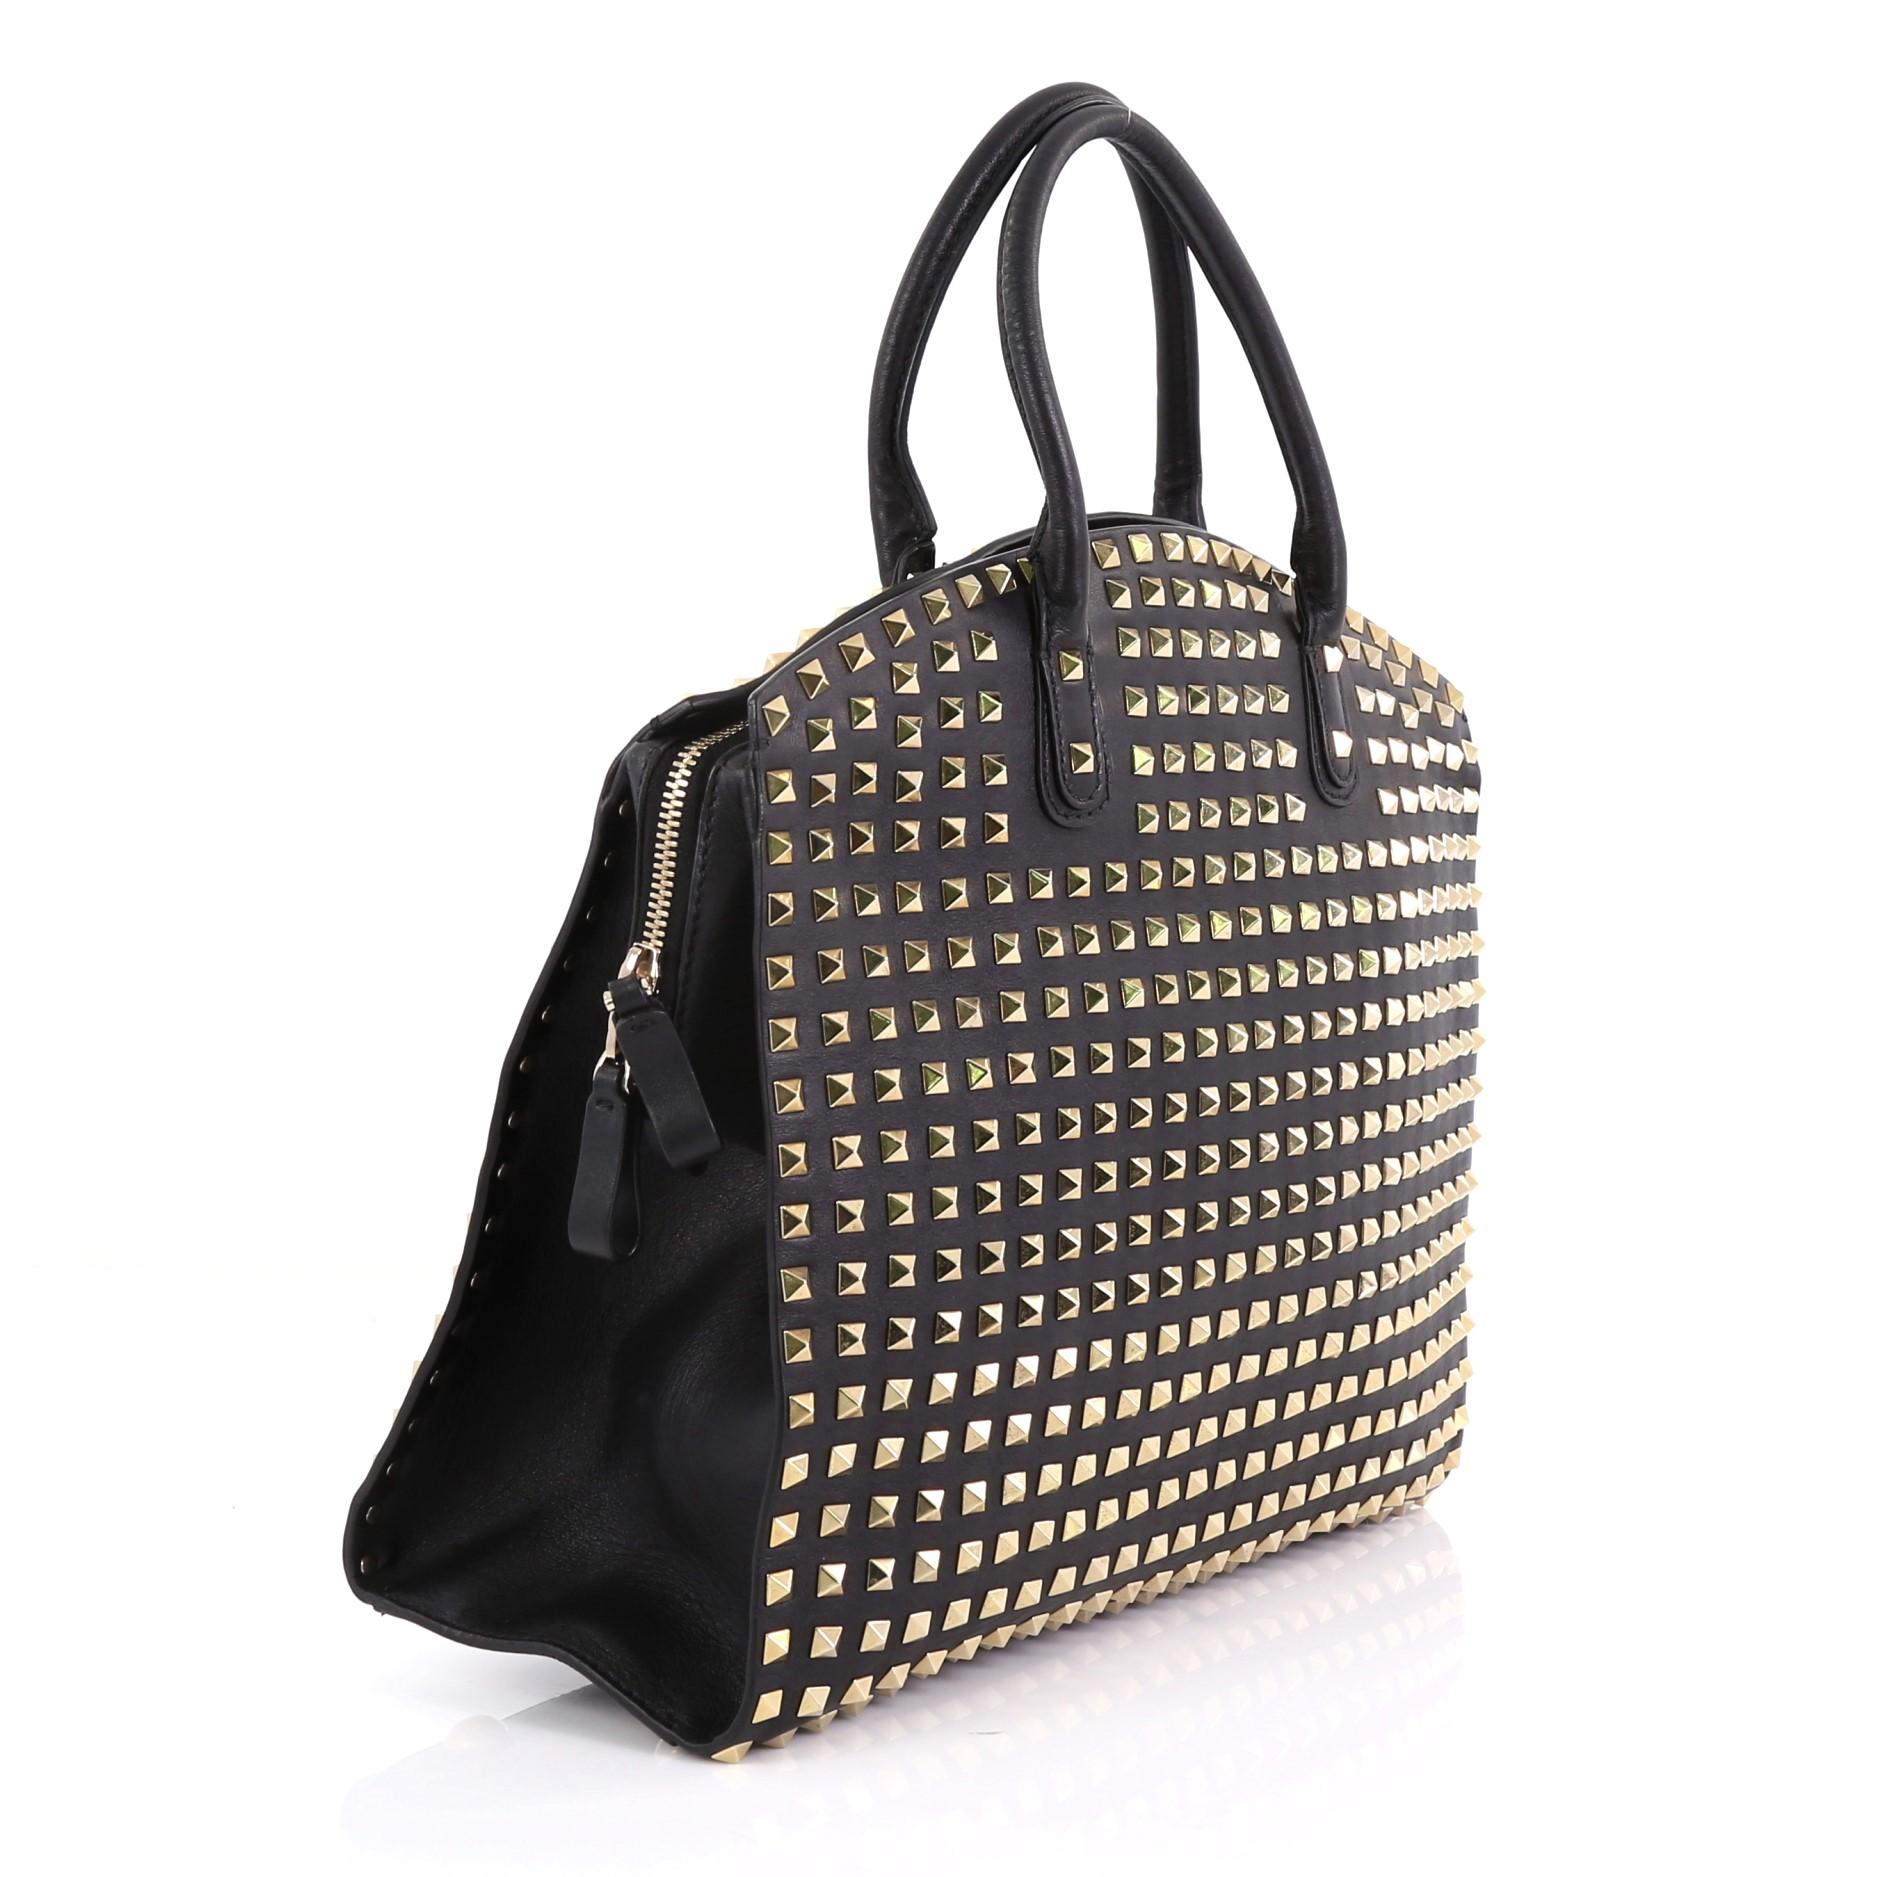 This Valentino Rockstud Convertible Dome Tote Full Studded Leather, crafted in black leather, features dual rolled top handles, pyramid stud details, and gold-tone hardware. Its zip closure opens to a black fabric interior with zip and slip pockets.